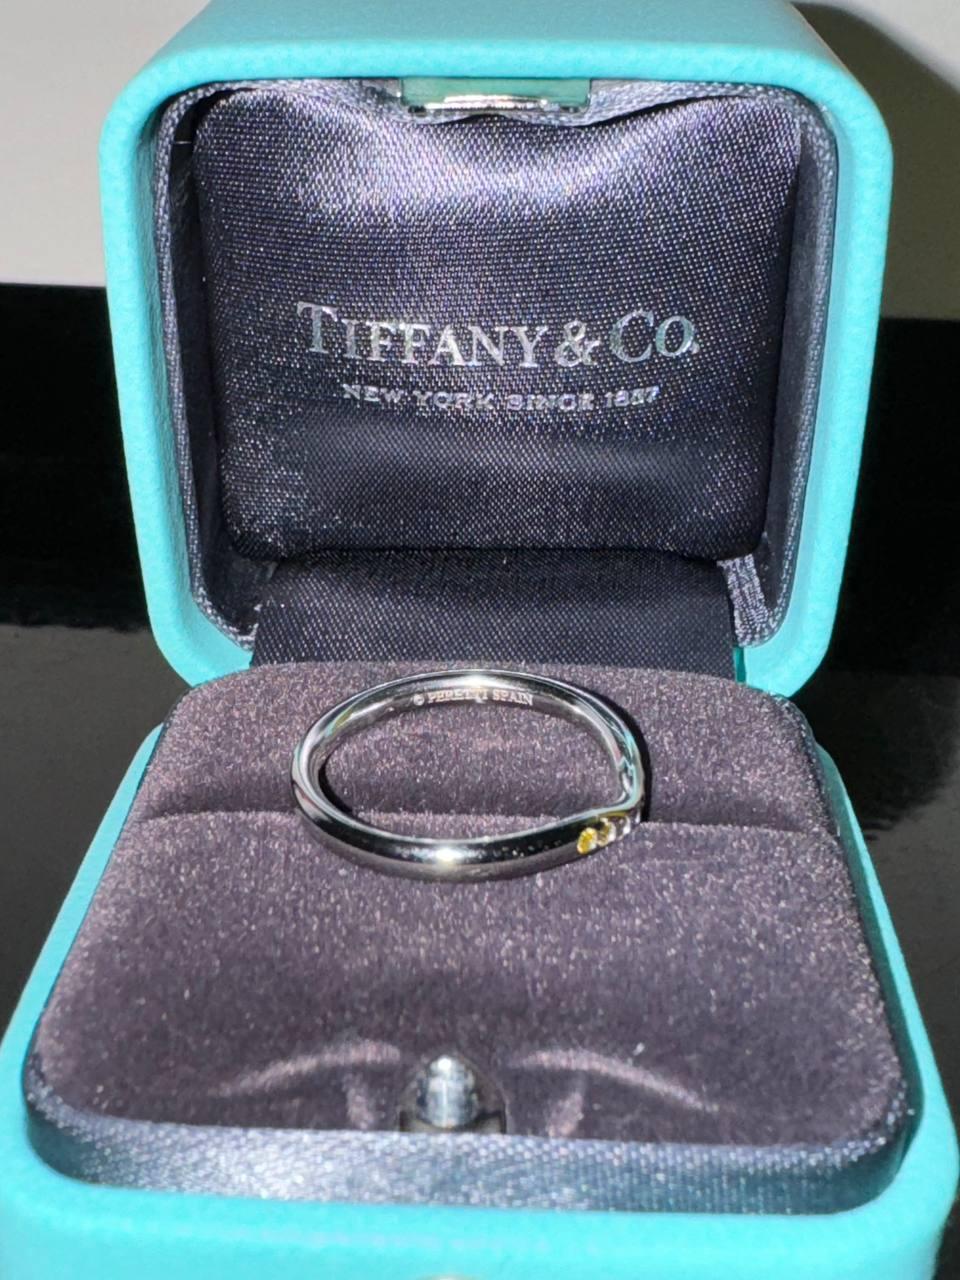 Tiffany Co Elsa Perreti Curved Platinum band ring with Yellow Diamonds 
Size 6
Yellow Diamonds: 0.06 ctw 
PT950
Comes within the original box 
Brand new , no defects , no signs of wear 
